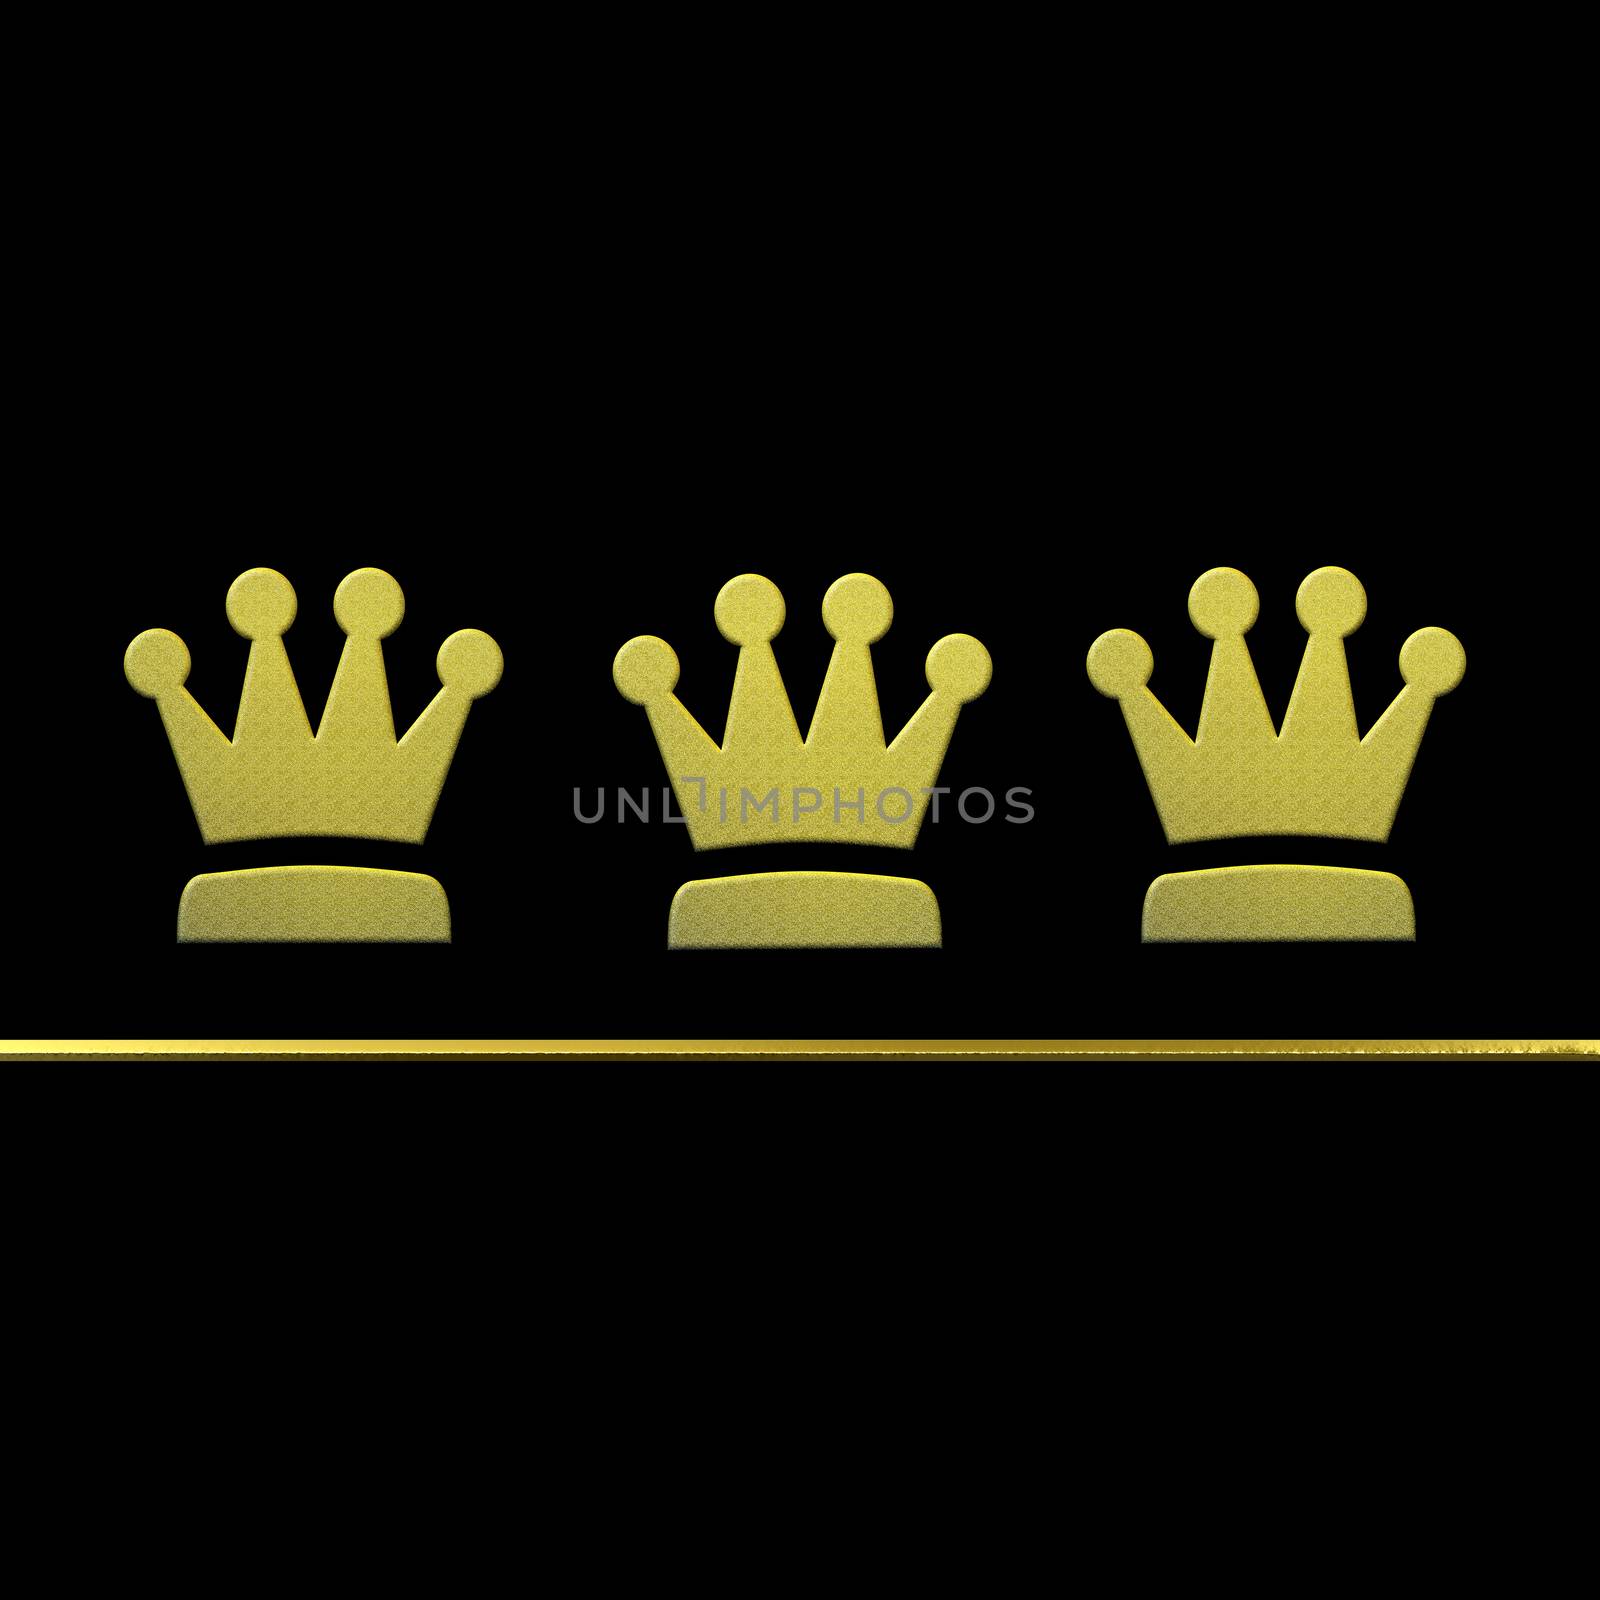 Christmas card Three Wise Men, golden metallic crowns in black background with copy space